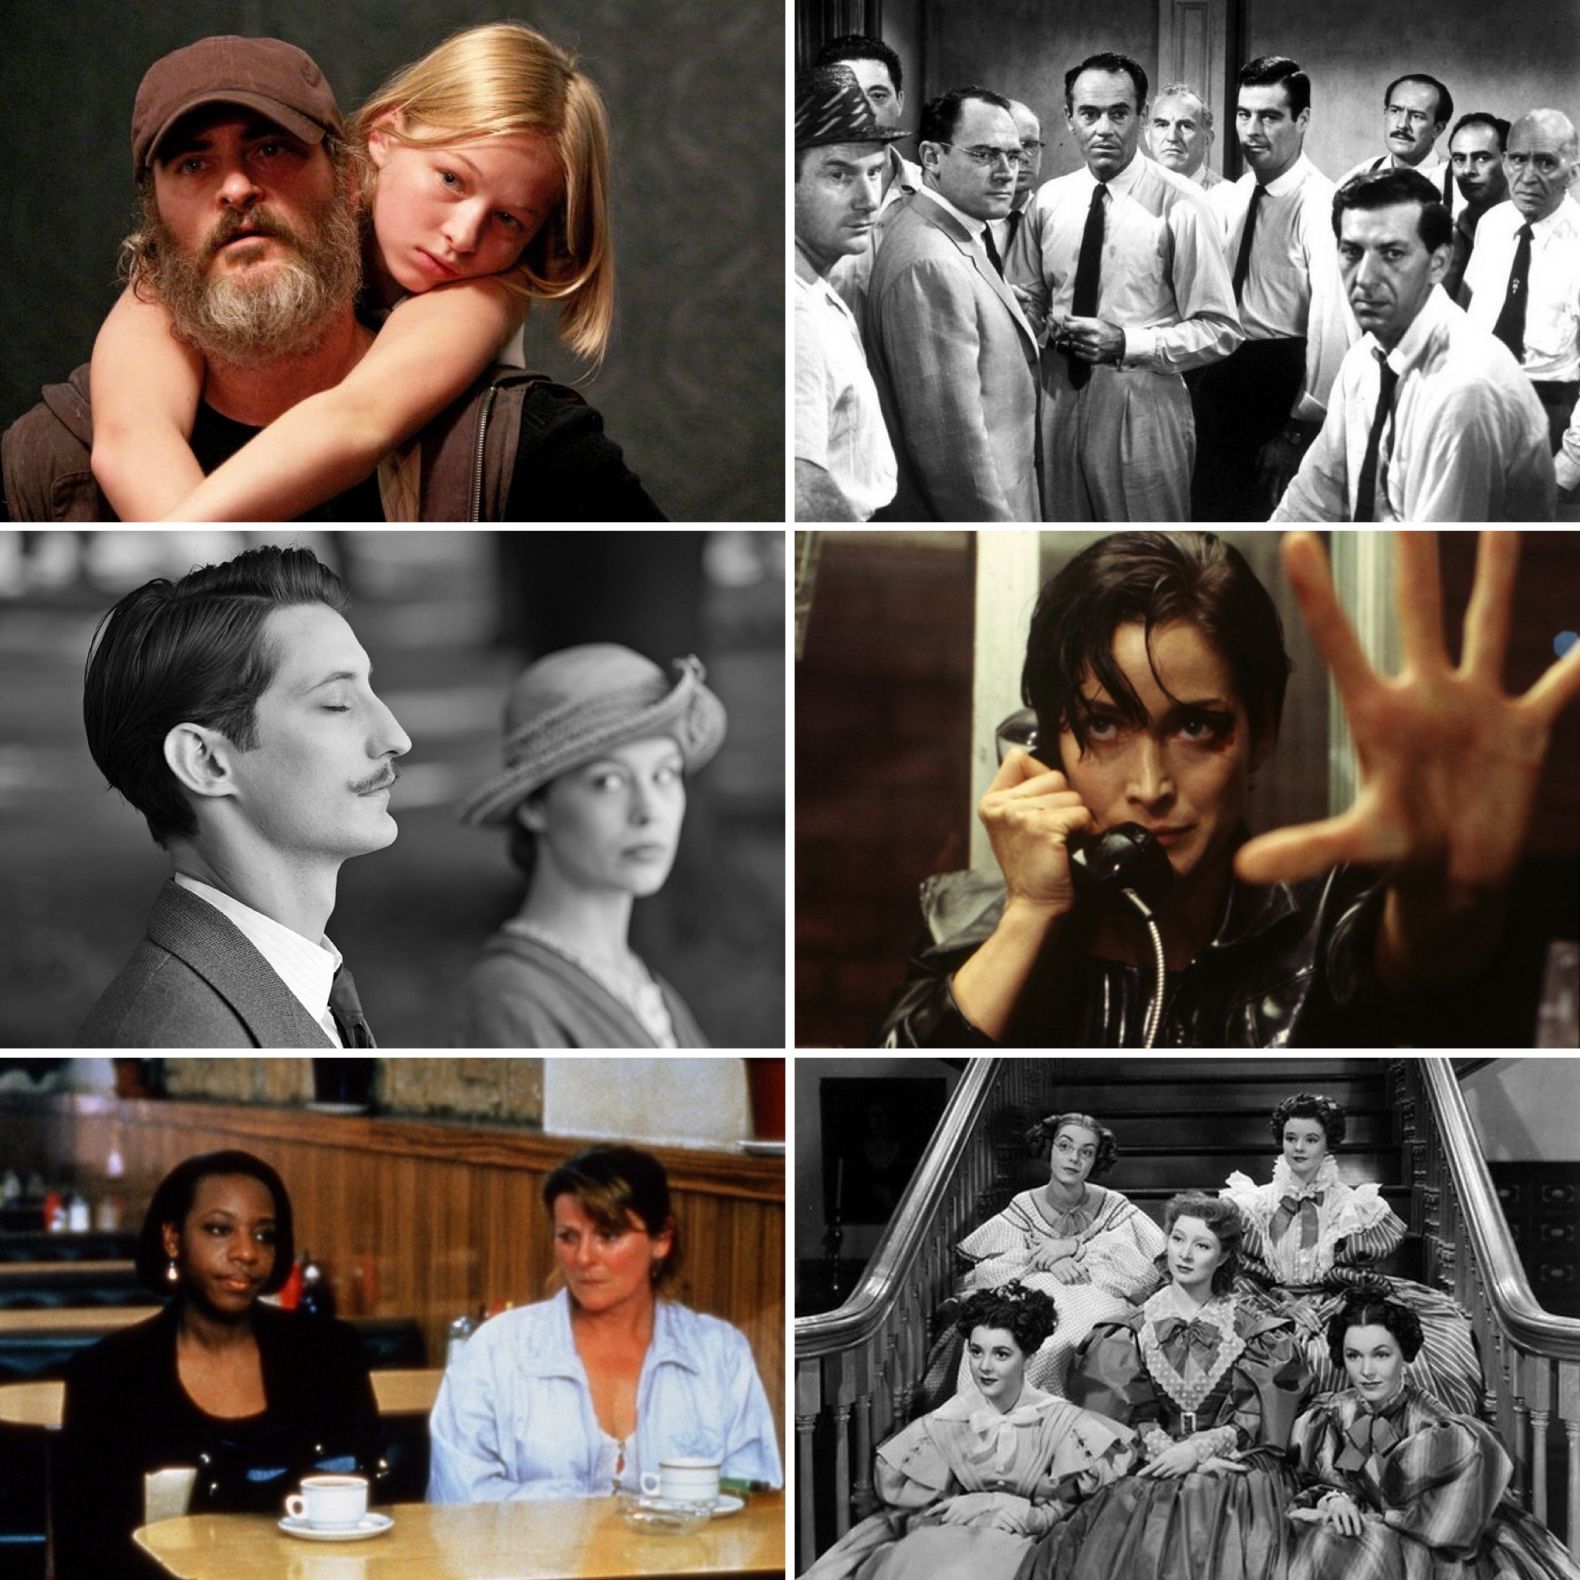 Duke Box #50: Our Guide to the Best Films on TV